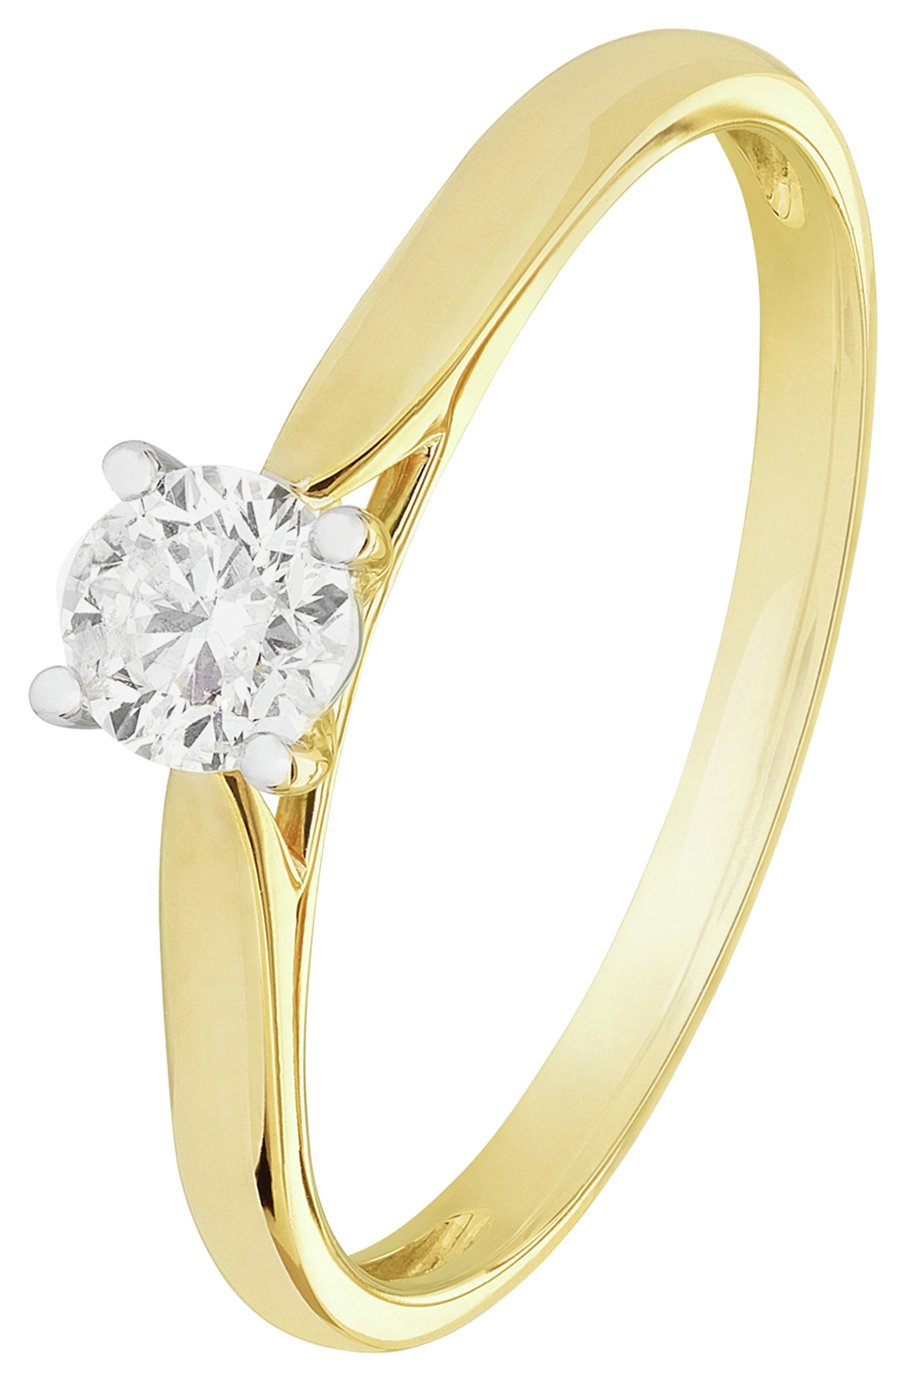 Revere 9ct Gold 0.33ct Diamond Solitaire Engagement Ring - N